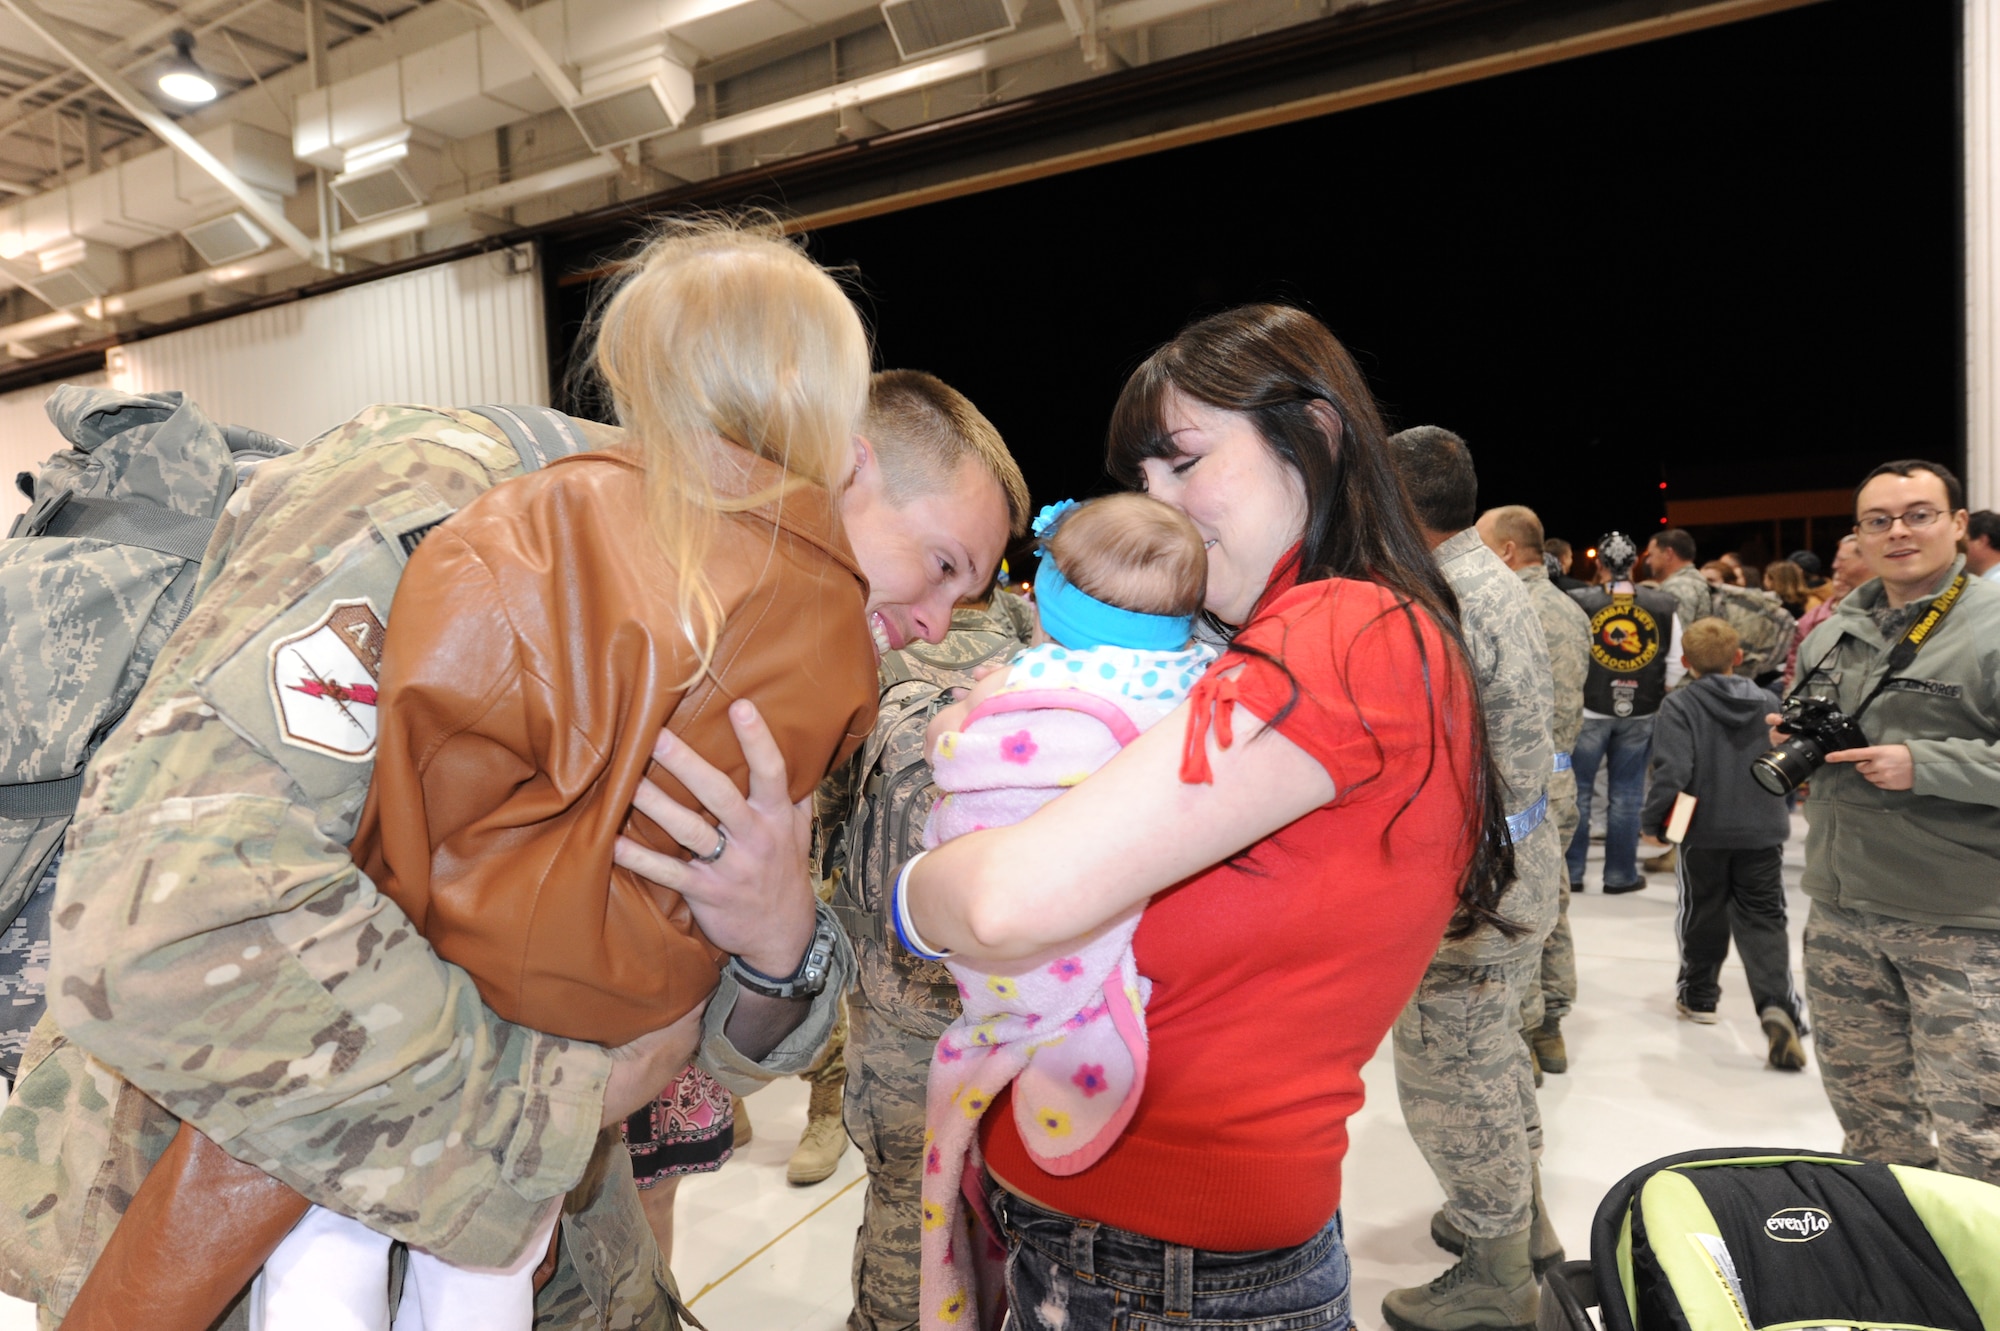 Nearly 300 reservists from the 442nd Fighter Wing at Whiteman Air Force Base, Mo., and a geographically separated unit at Barksdale AFB, La., returned from a 90-day deployment to Afghanistan, April 11, 2012. The 442nd Fighter Wing is an A-10 Thunderbolt II Air Force Reserve unit at Whiteman Air Force Base, Mo. (U.S. Air Force photo/Staff Sgt. Danielle Johnston)